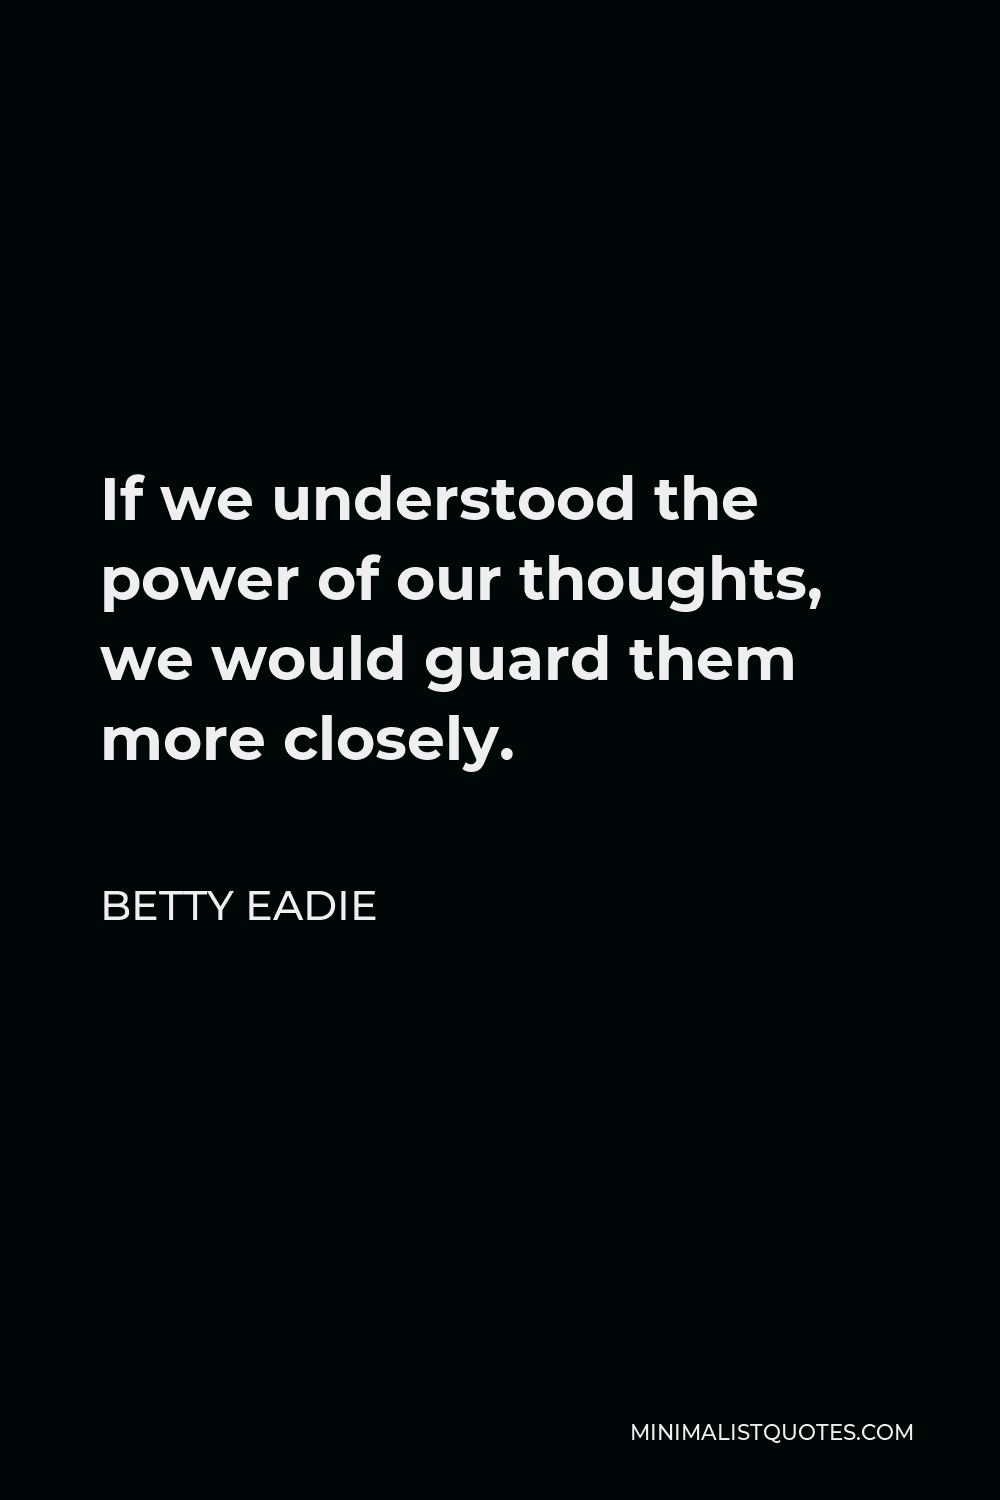 Betty Eadie Quote - If we understood the power of our thoughts, we would guard them more closely.